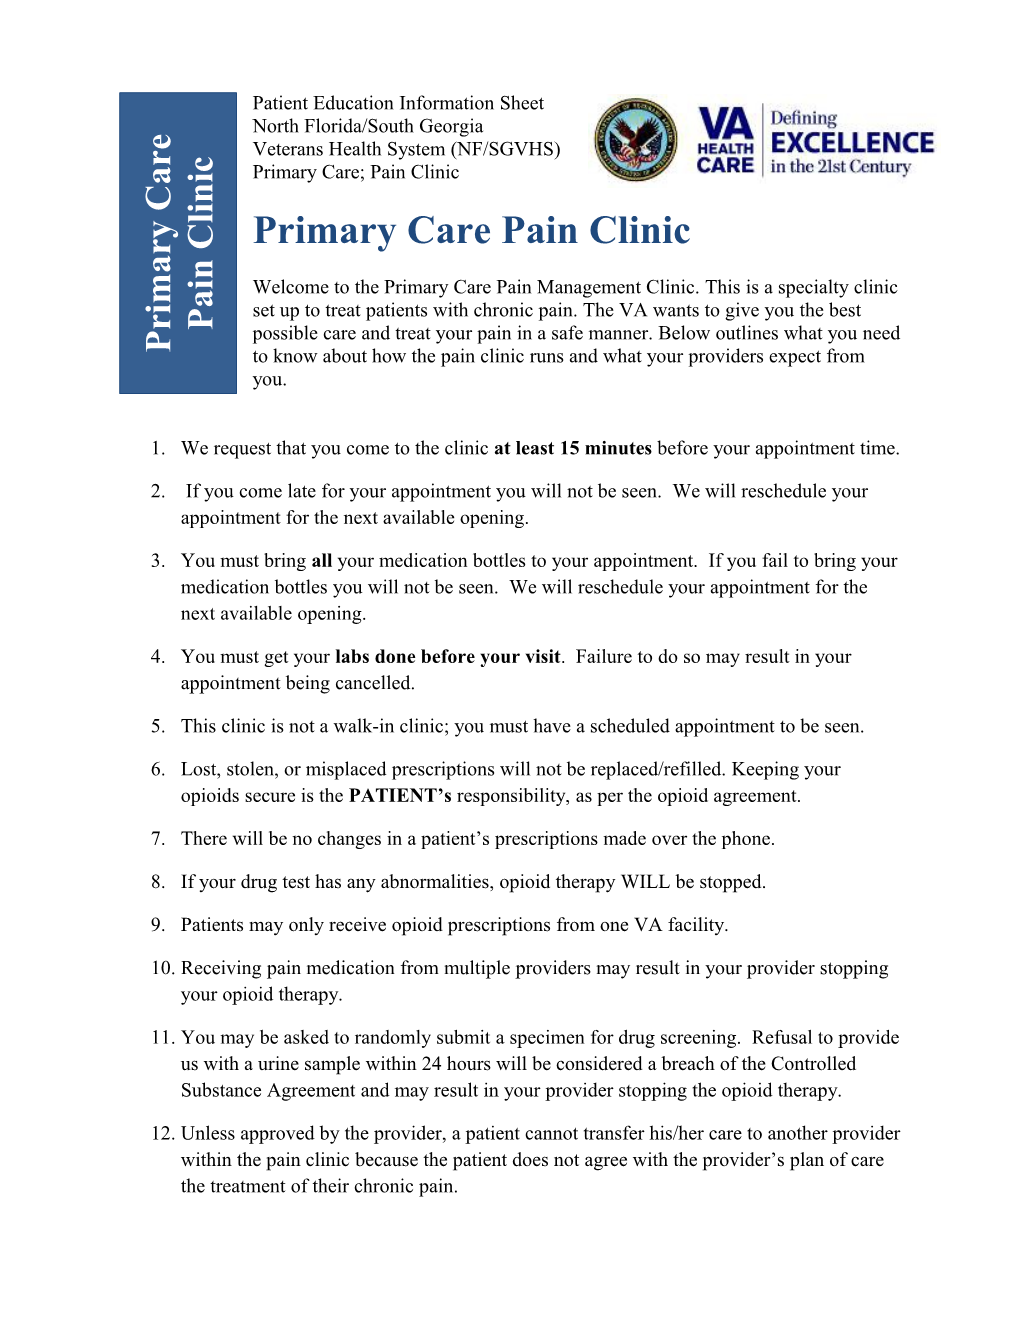 Primary Care Pain Clinic